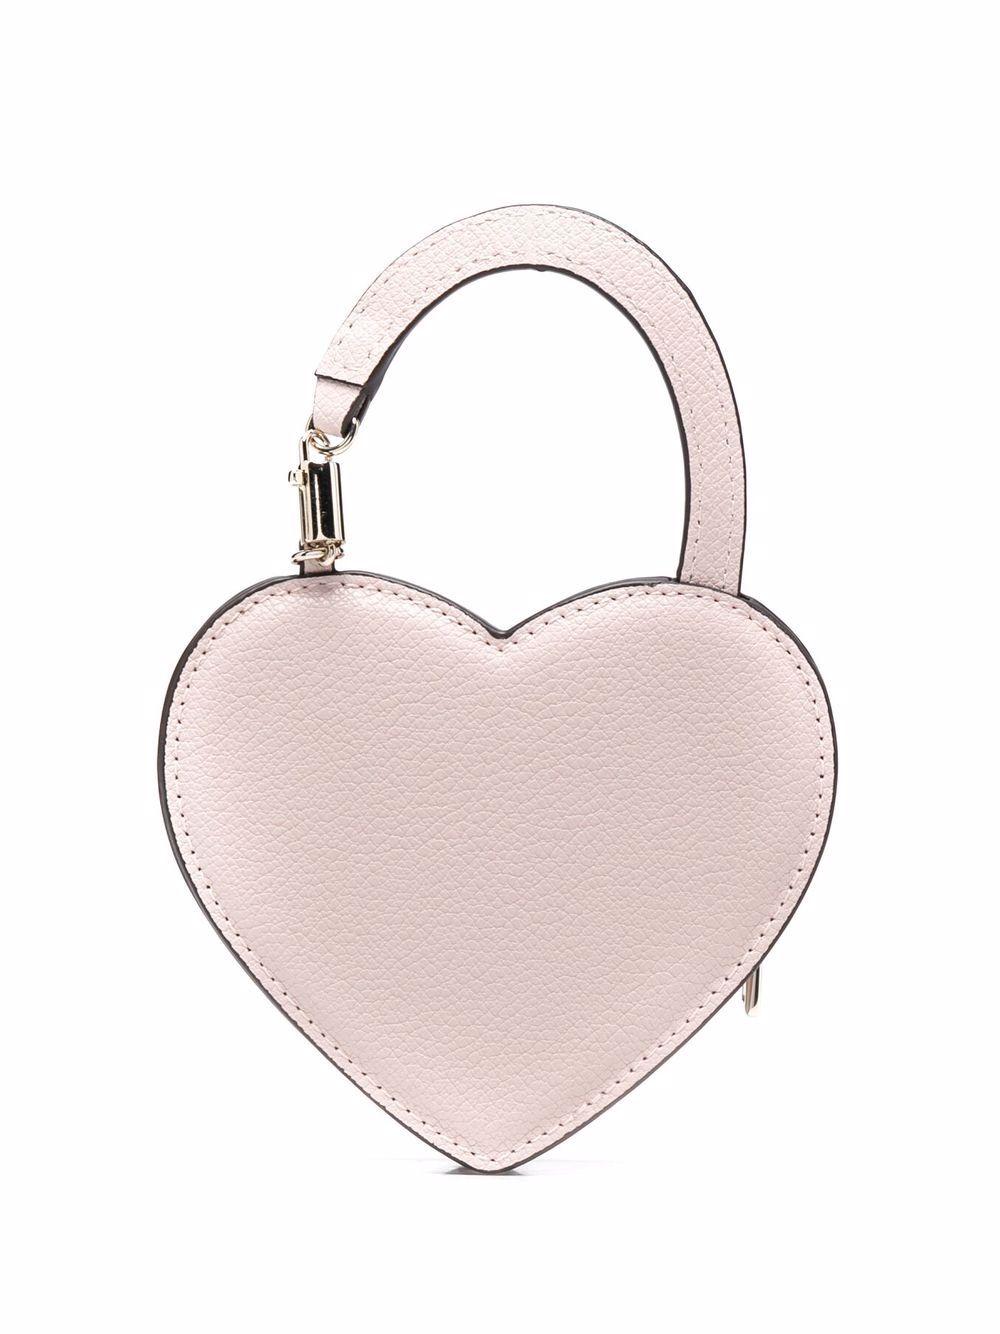 Furla Coral Handbag – From the Heart Consignment